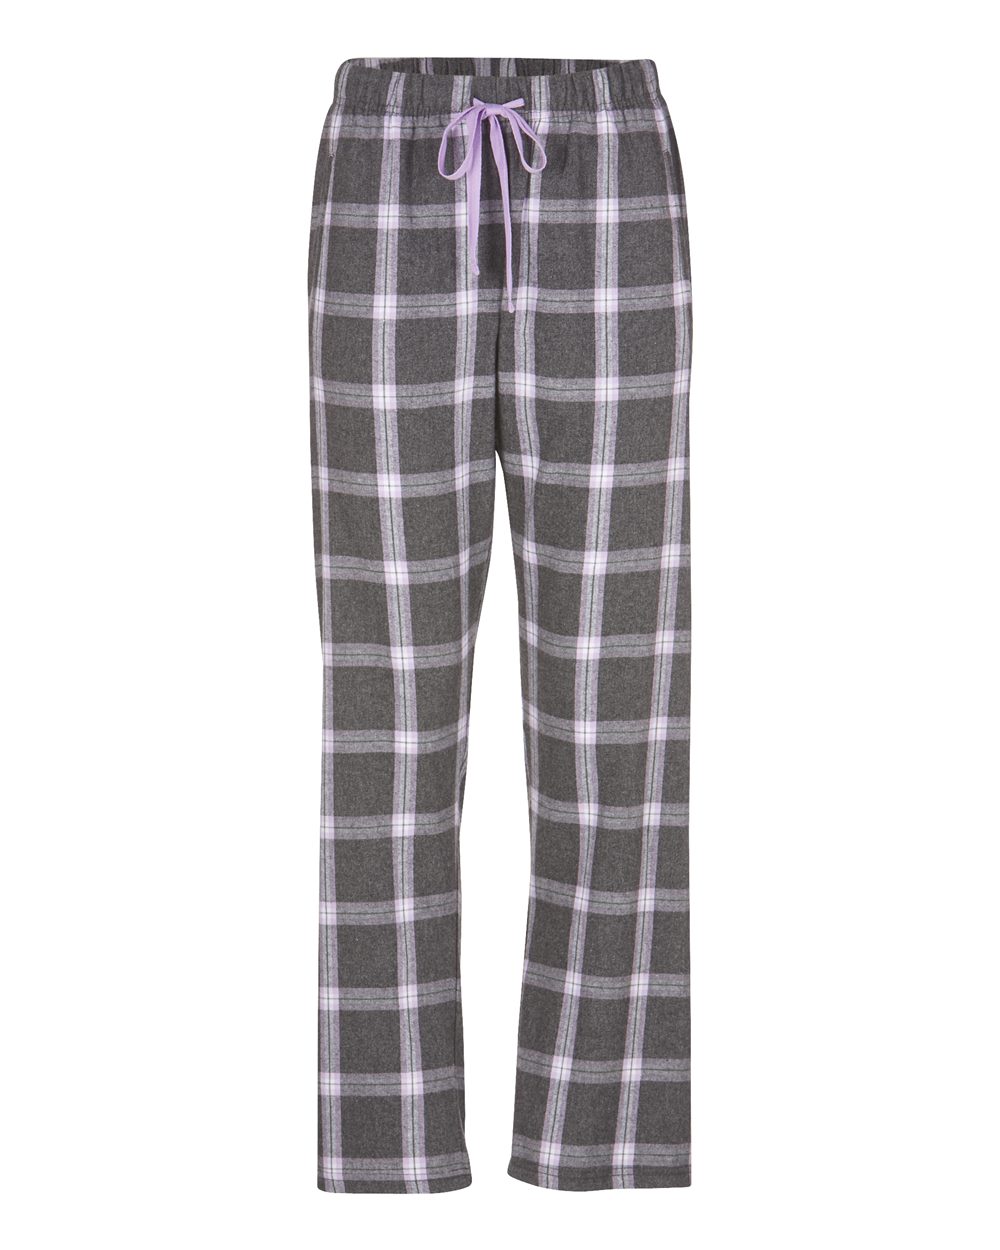 click to view Charcoal Lavender Tomboy Plaid